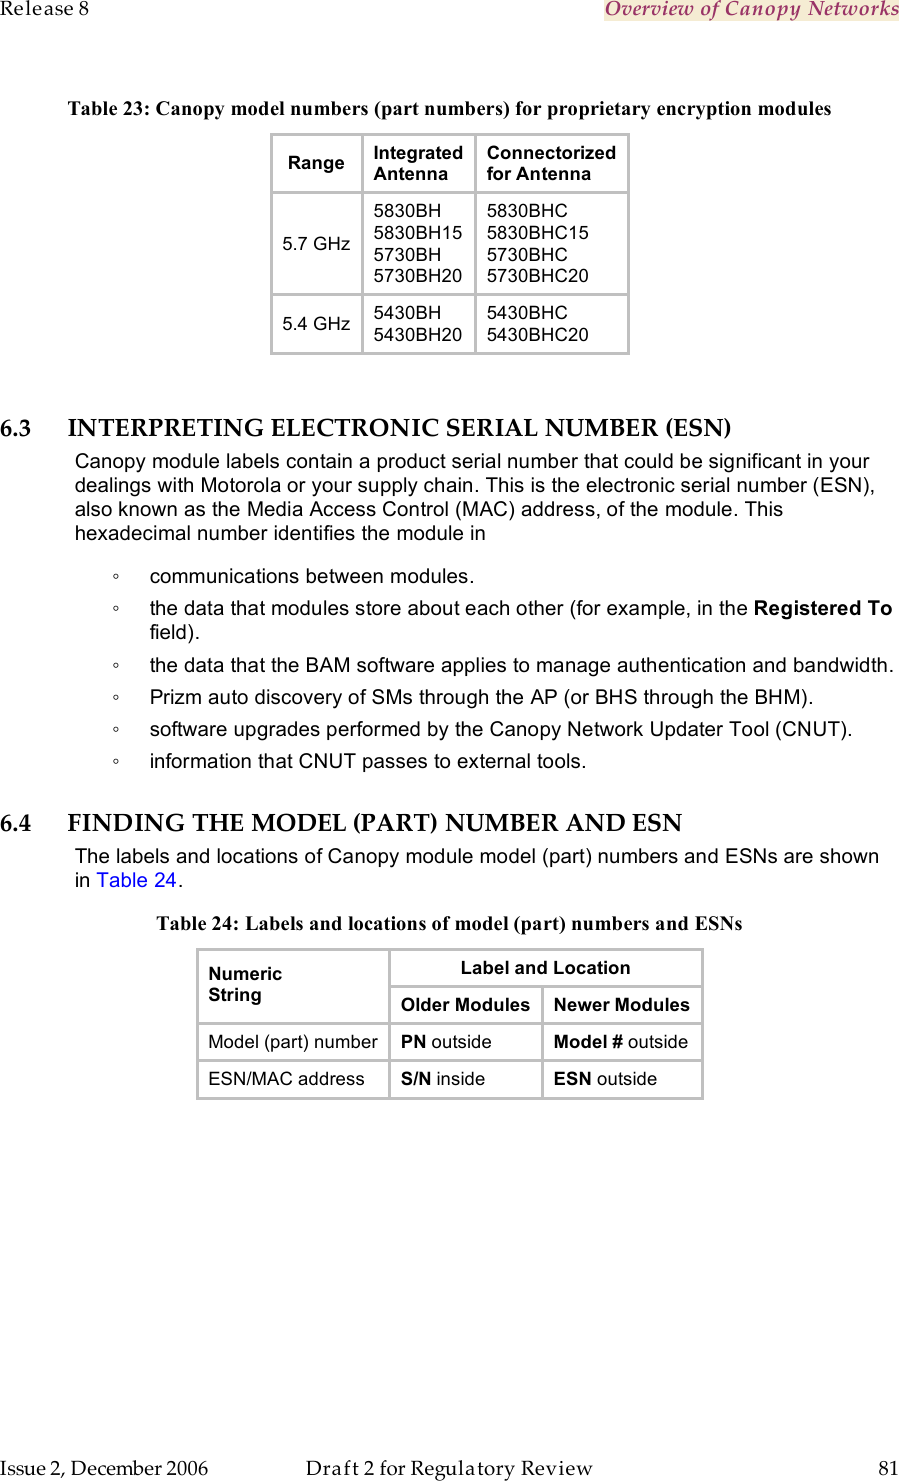 Release 8    Overview of Canopy Networks                  March 200                  Through Software Release 6.   Issue 2, December 2006  Draft 2 for Regulatory Review  81     Table 23: Canopy model numbers (part numbers) for proprietary encryption modules Range Integrated Antenna Connectorized for Antenna 5.7 GHz 5830BH 5830BH15 5730BH 5730BH20 5830BHC 5830BHC15 5730BHC 5730BHC20 5.4 GHz 5430BH 5430BH20 5430BHC 5430BHC20  6.3 INTERPRETING ELECTRONIC SERIAL NUMBER (ESN) Canopy module labels contain a product serial number that could be significant in your dealings with Motorola or your supply chain. This is the electronic serial number (ESN), also known as the Media Access Control (MAC) address, of the module. This hexadecimal number identifies the module in  ◦  communications between modules. ◦  the data that modules store about each other (for example, in the Registered To field). ◦  the data that the BAM software applies to manage authentication and bandwidth. ◦  Prizm auto discovery of SMs through the AP (or BHS through the BHM). ◦  software upgrades performed by the Canopy Network Updater Tool (CNUT). ◦  information that CNUT passes to external tools. 6.4 FINDING THE MODEL (PART) NUMBER AND ESN The labels and locations of Canopy module model (part) numbers and ESNs are shown in Table 24. Table 24: Labels and locations of model (part) numbers and ESNs Label and Location Numeric String Older Modules Newer Modules Model (part) number PN outside Model # outside ESN/MAC address S/N inside ESN outside  